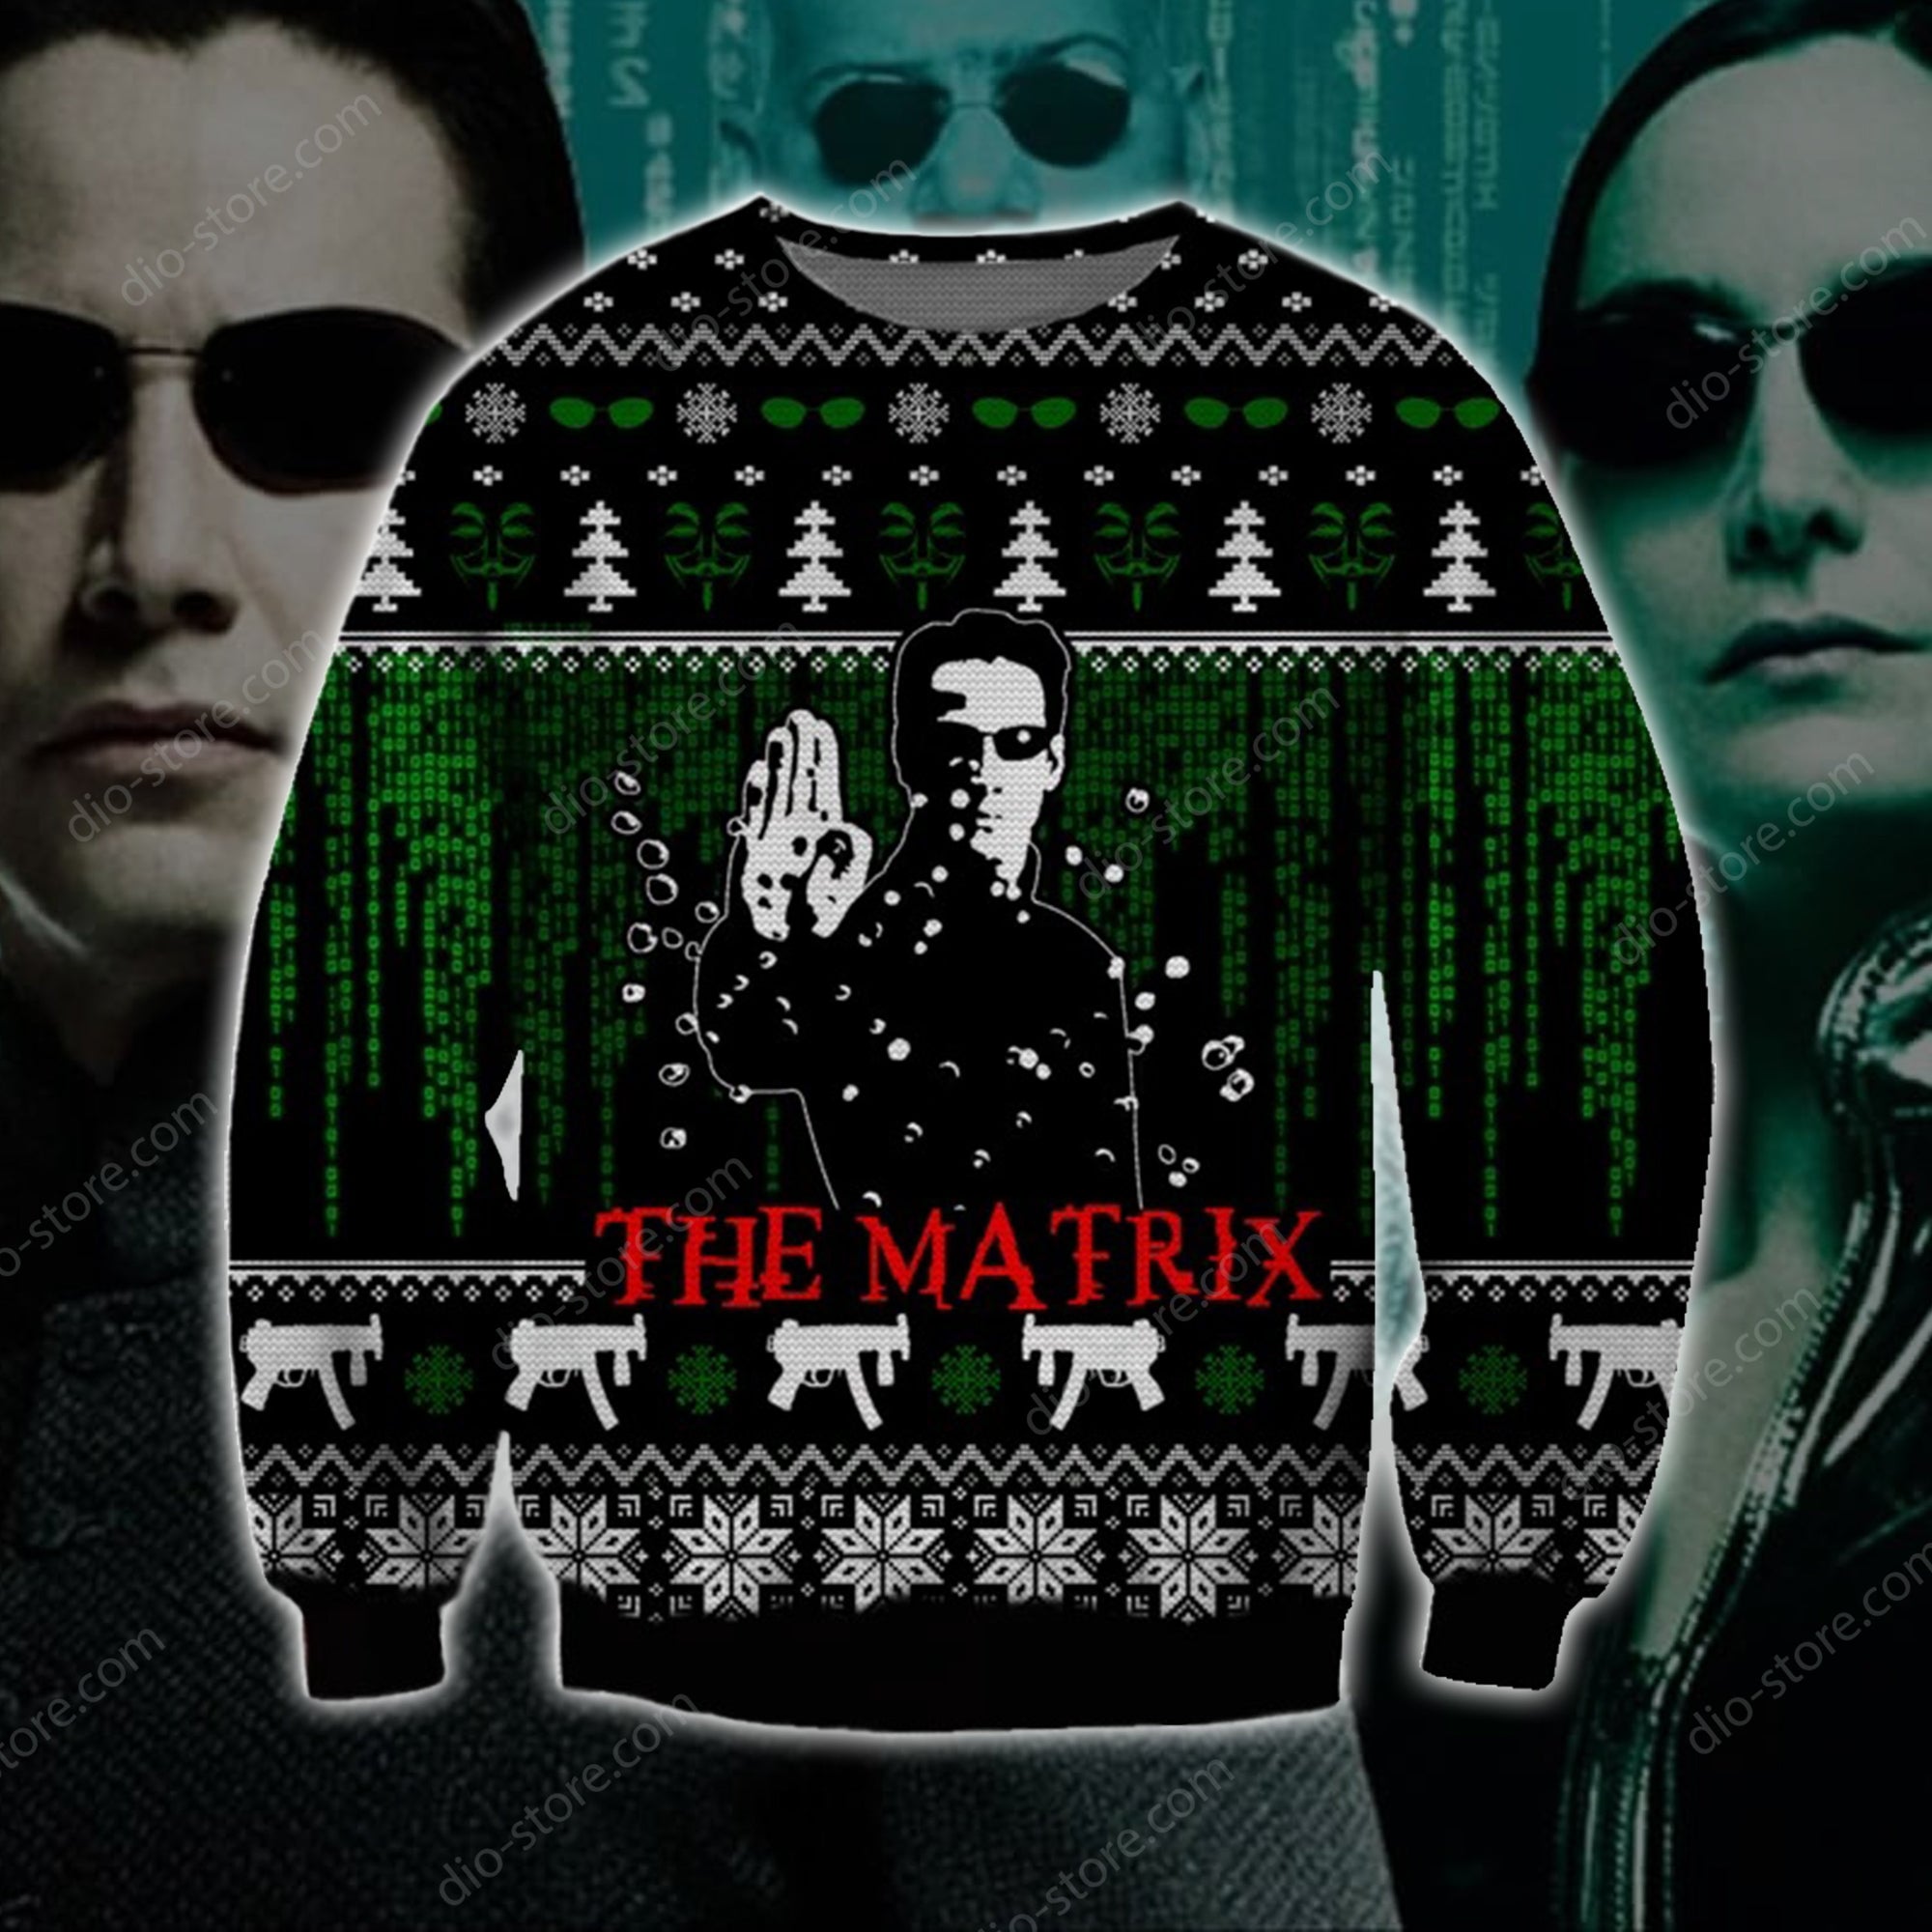 The Matrix Knitting Pattern 3D Print Ugly Christmas Sweater Hoodie All Over Printed Cint10688